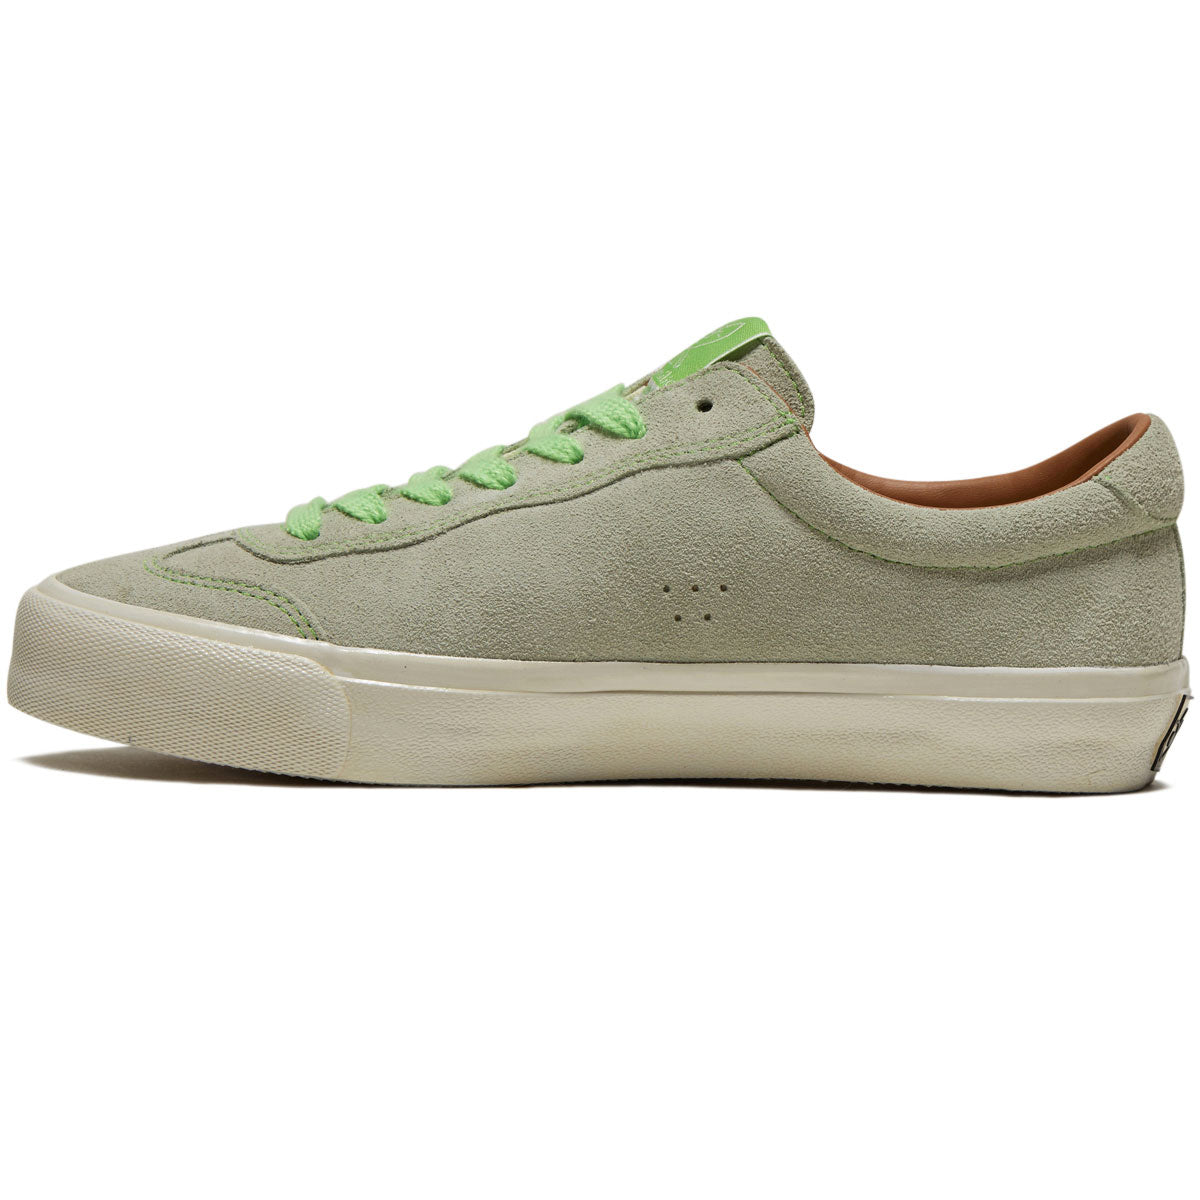 Last Resort AB VM004 Milic Suede Shoes - Green Tint/White image 2